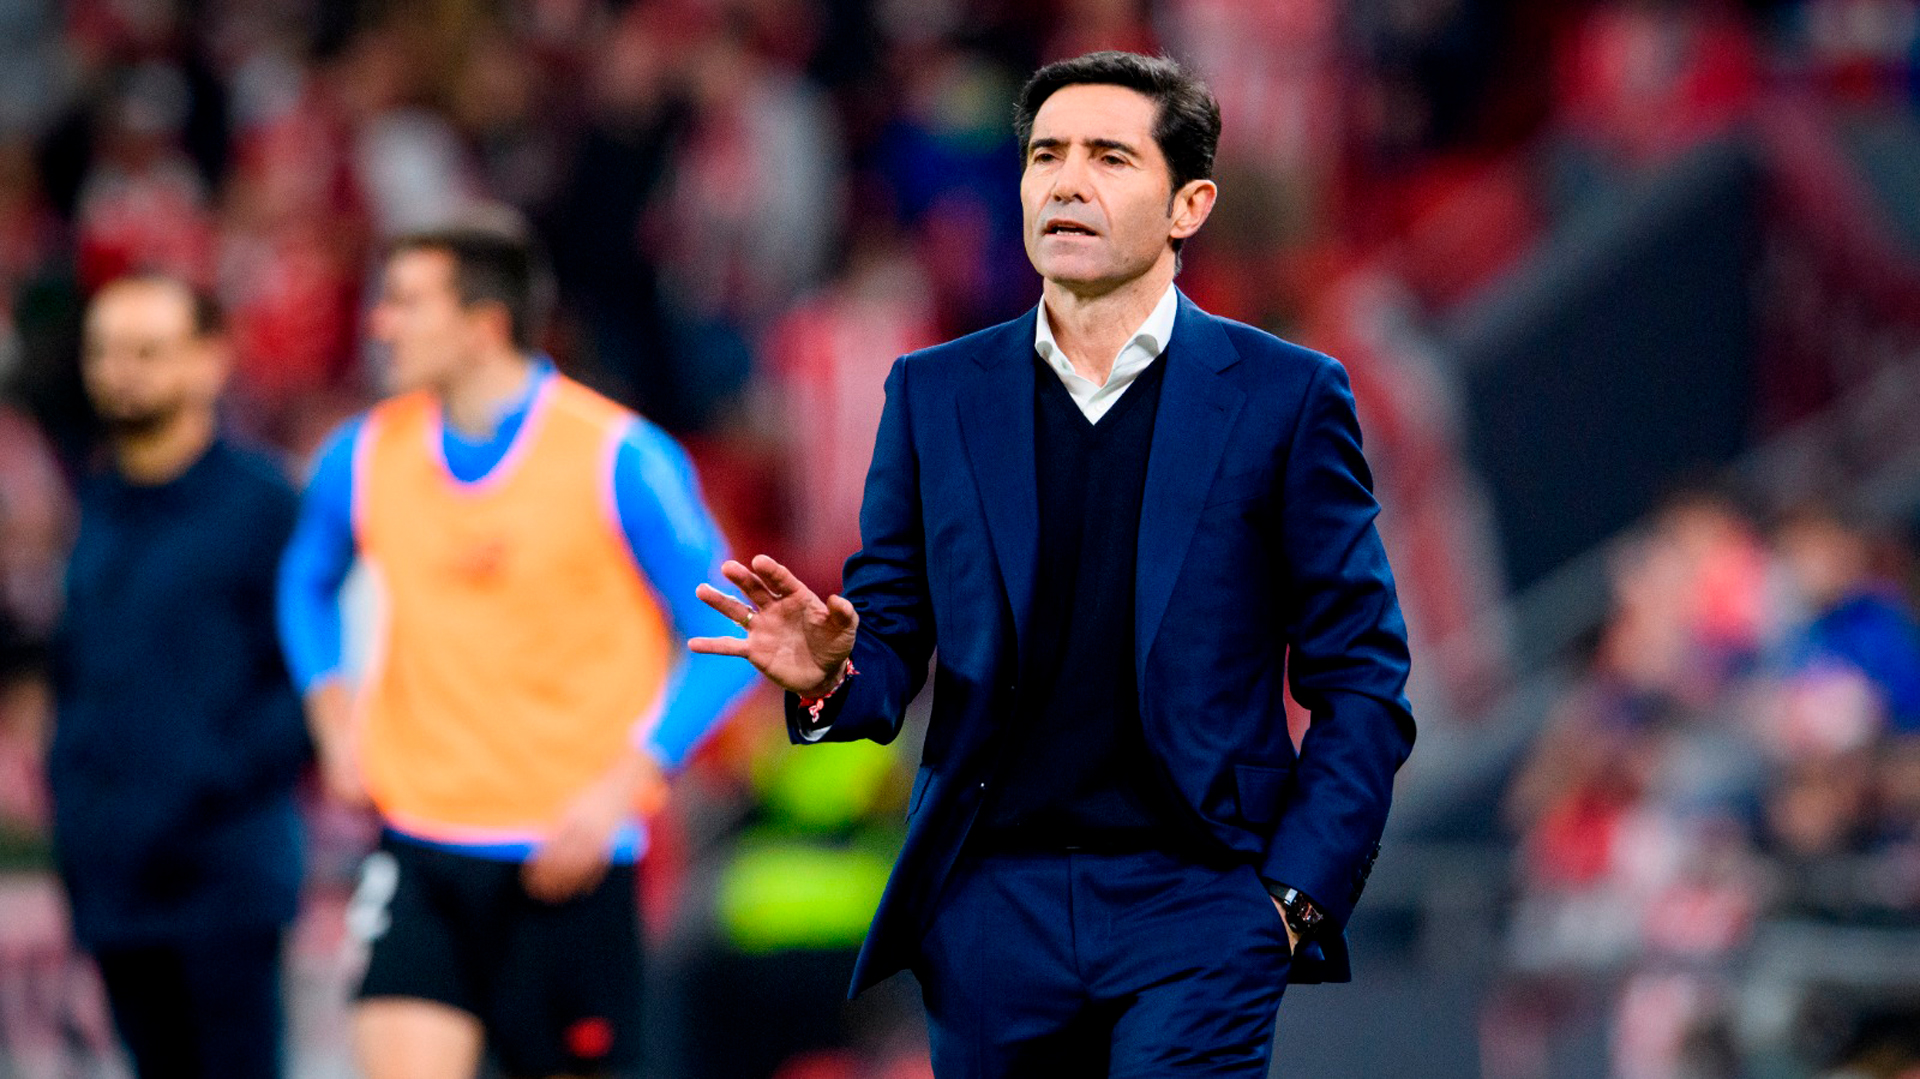 Marcelino: “Neither team dominated the match” | Athletic Club's ...